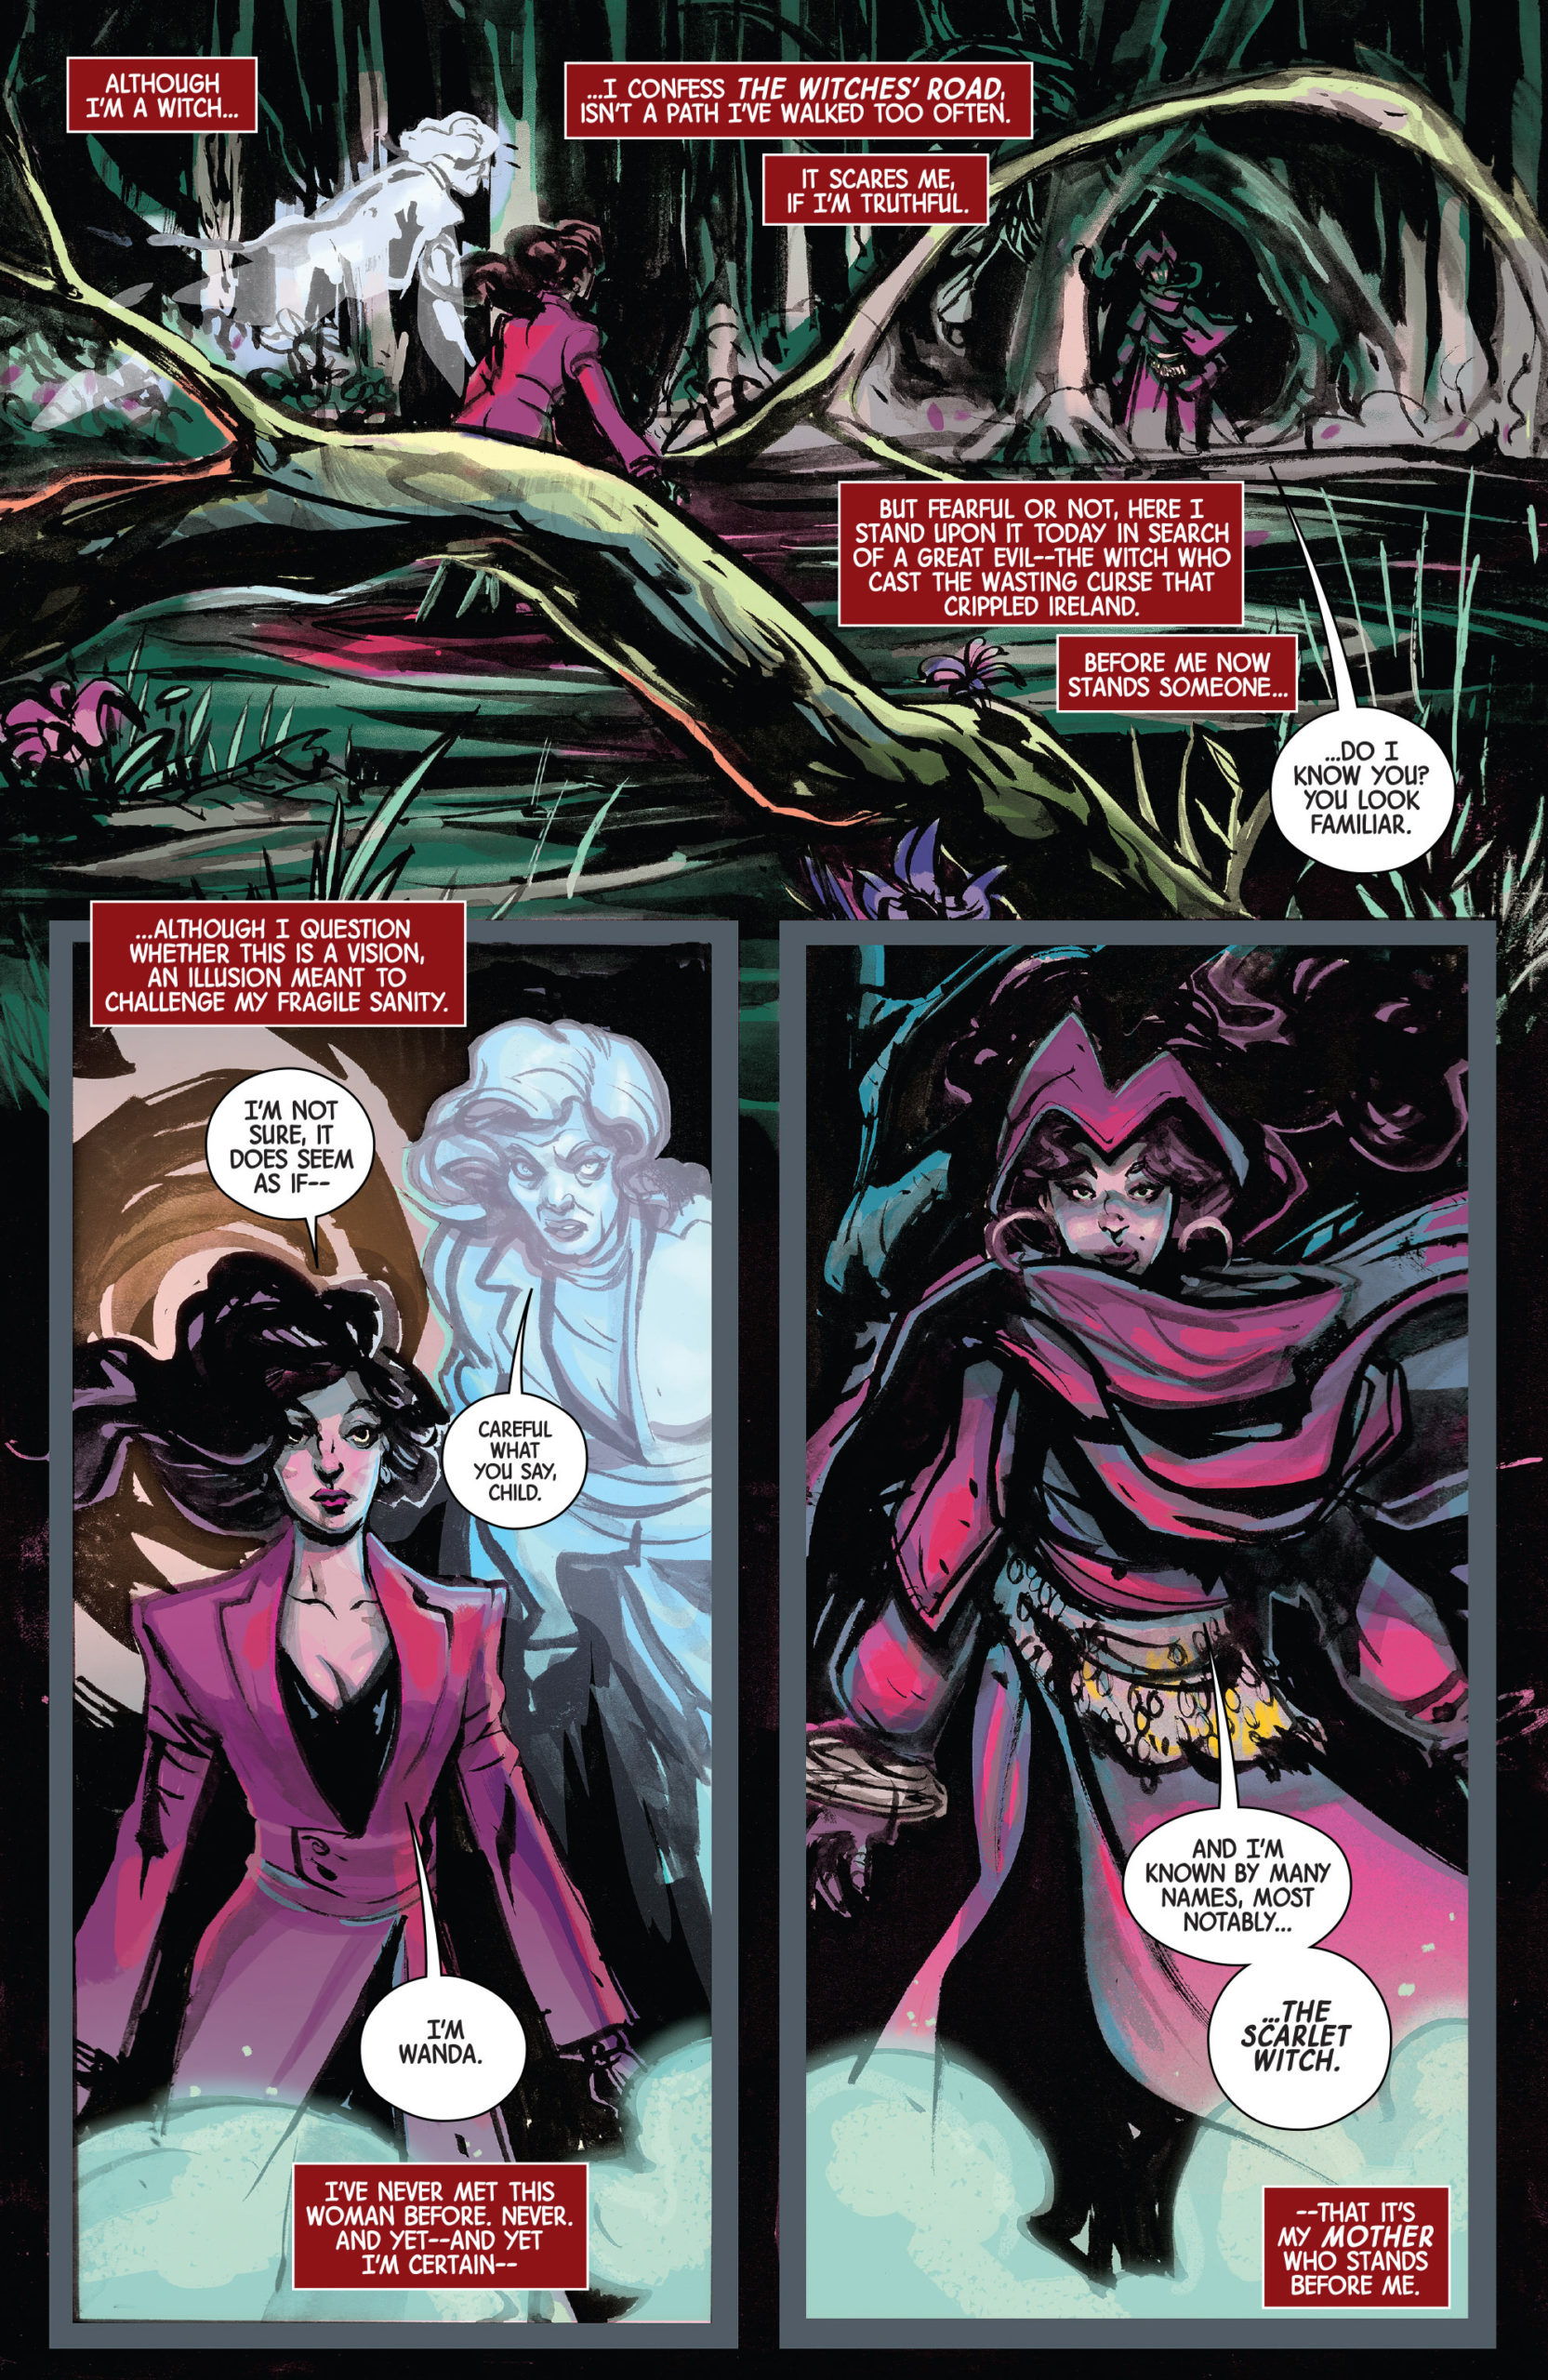 Wanda encountering her mother on the Witches' Road. (Image: Chris Visions/Marvel)